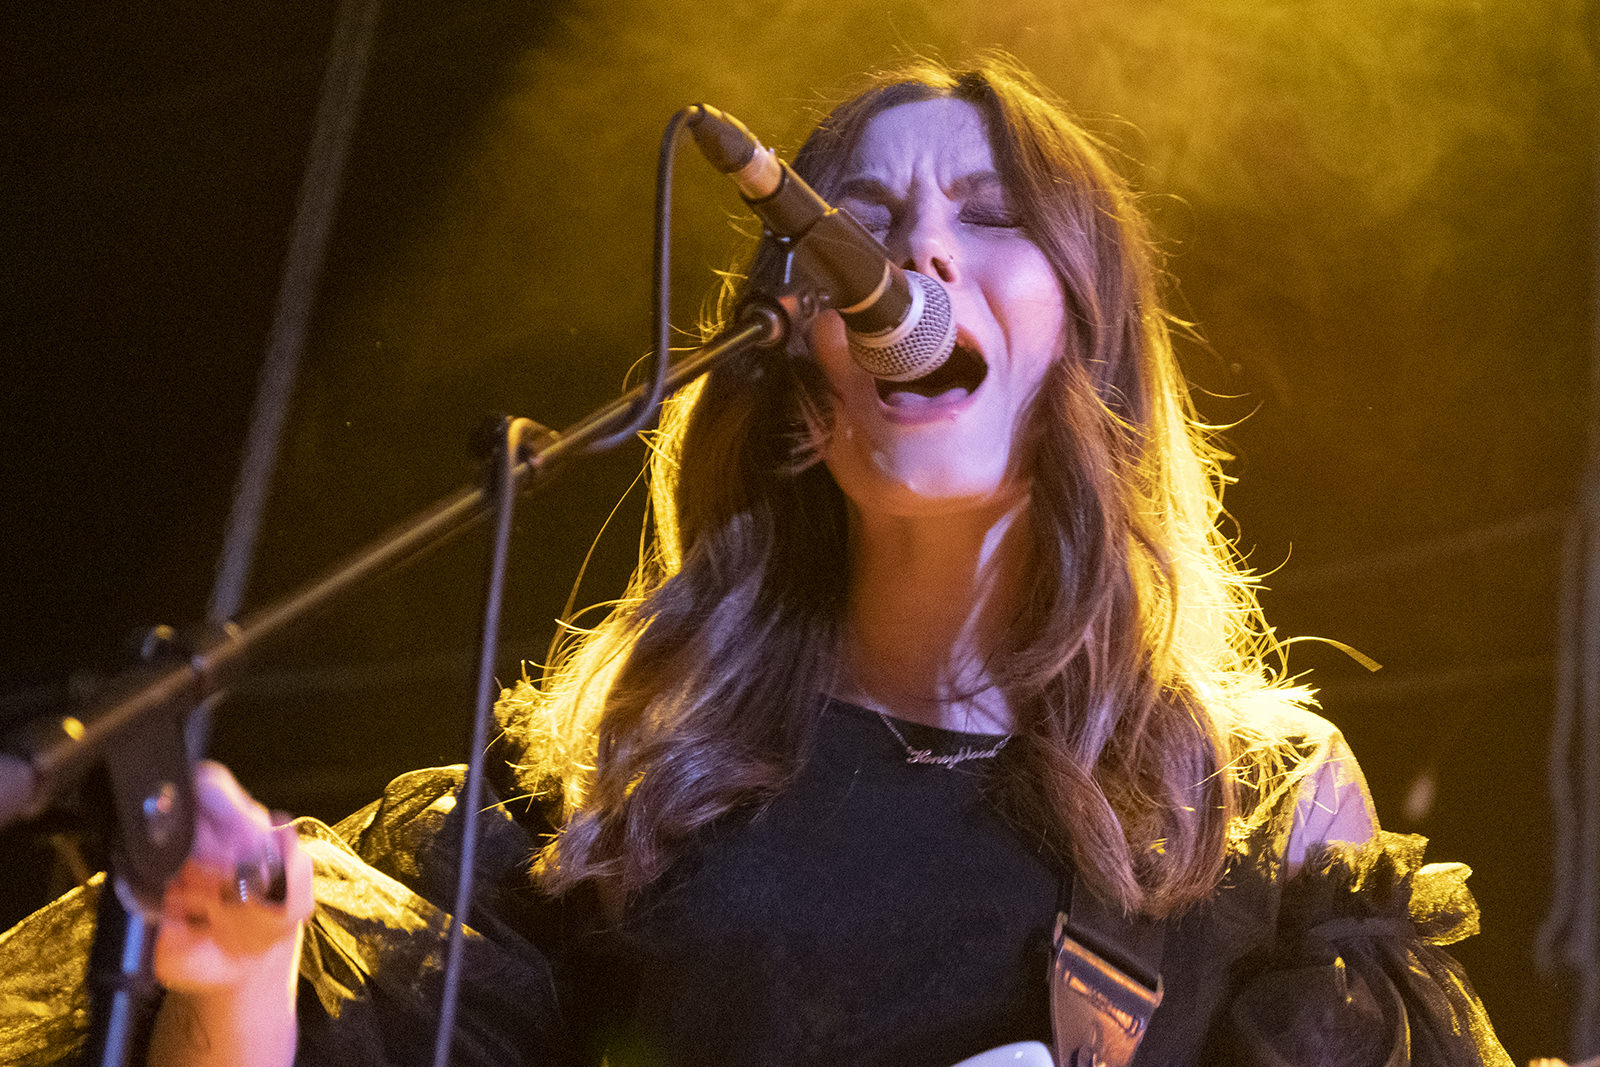 Honeyblood on stage at the QMU Glasgow on 24 October 2019